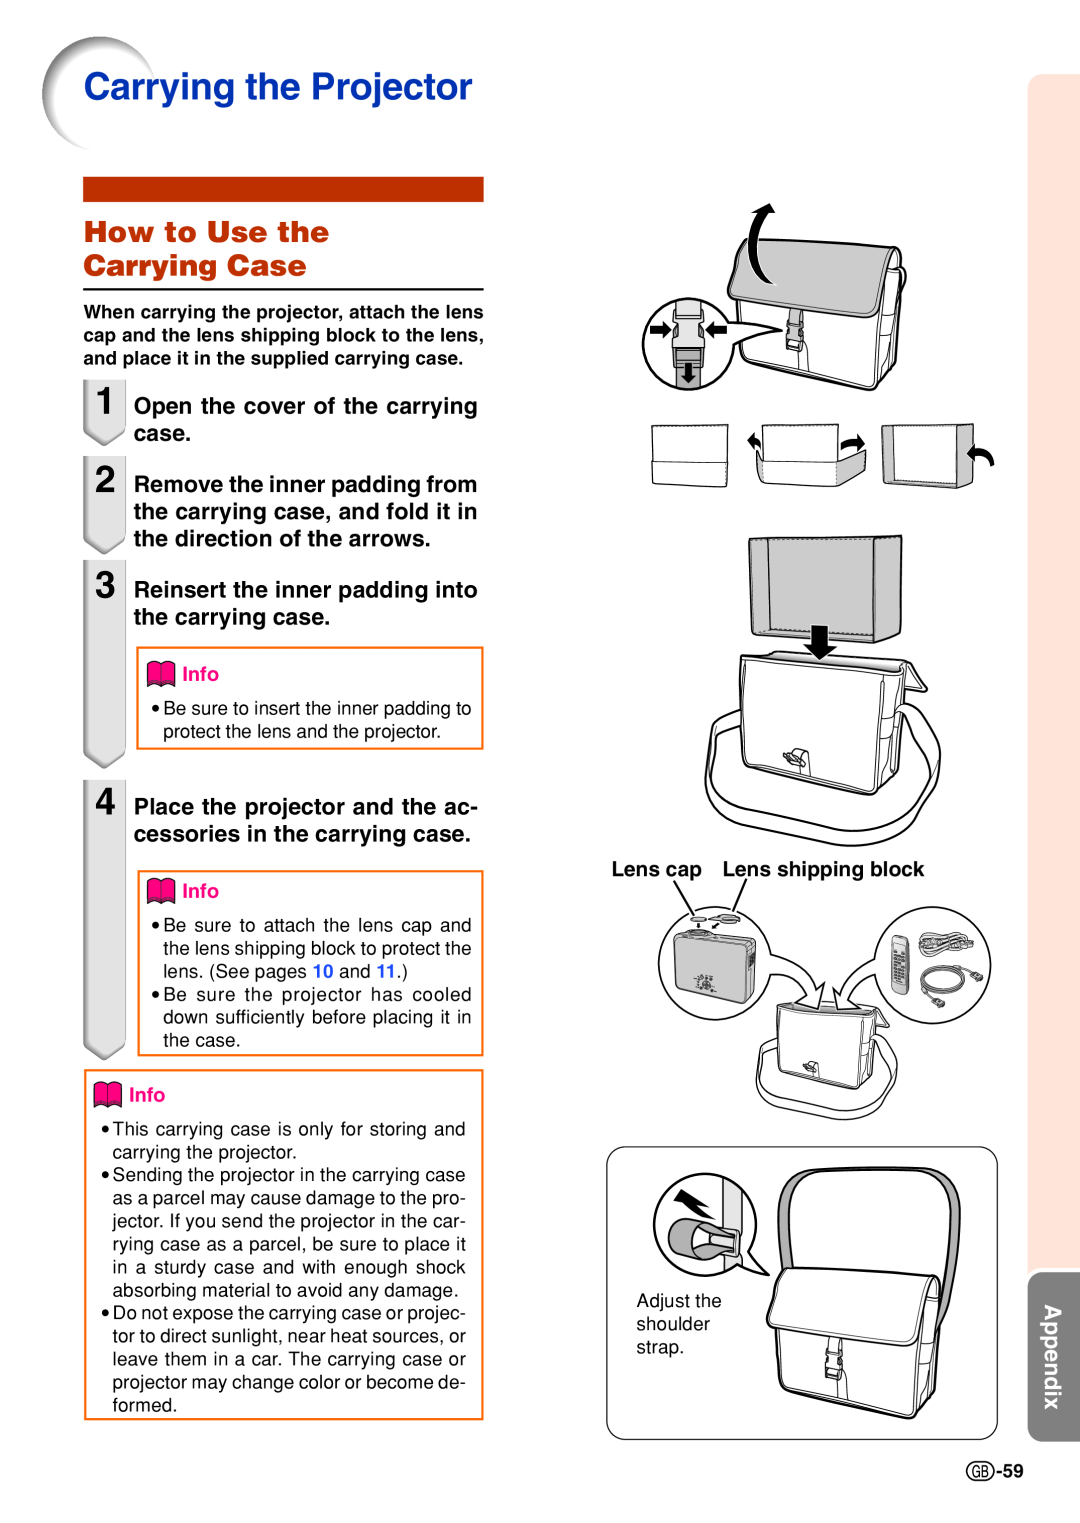 Sharp PG-B10S Carrying the Projector, How to Use the Carrying Case, Open the cover of the carrying case, Appendix, Info 